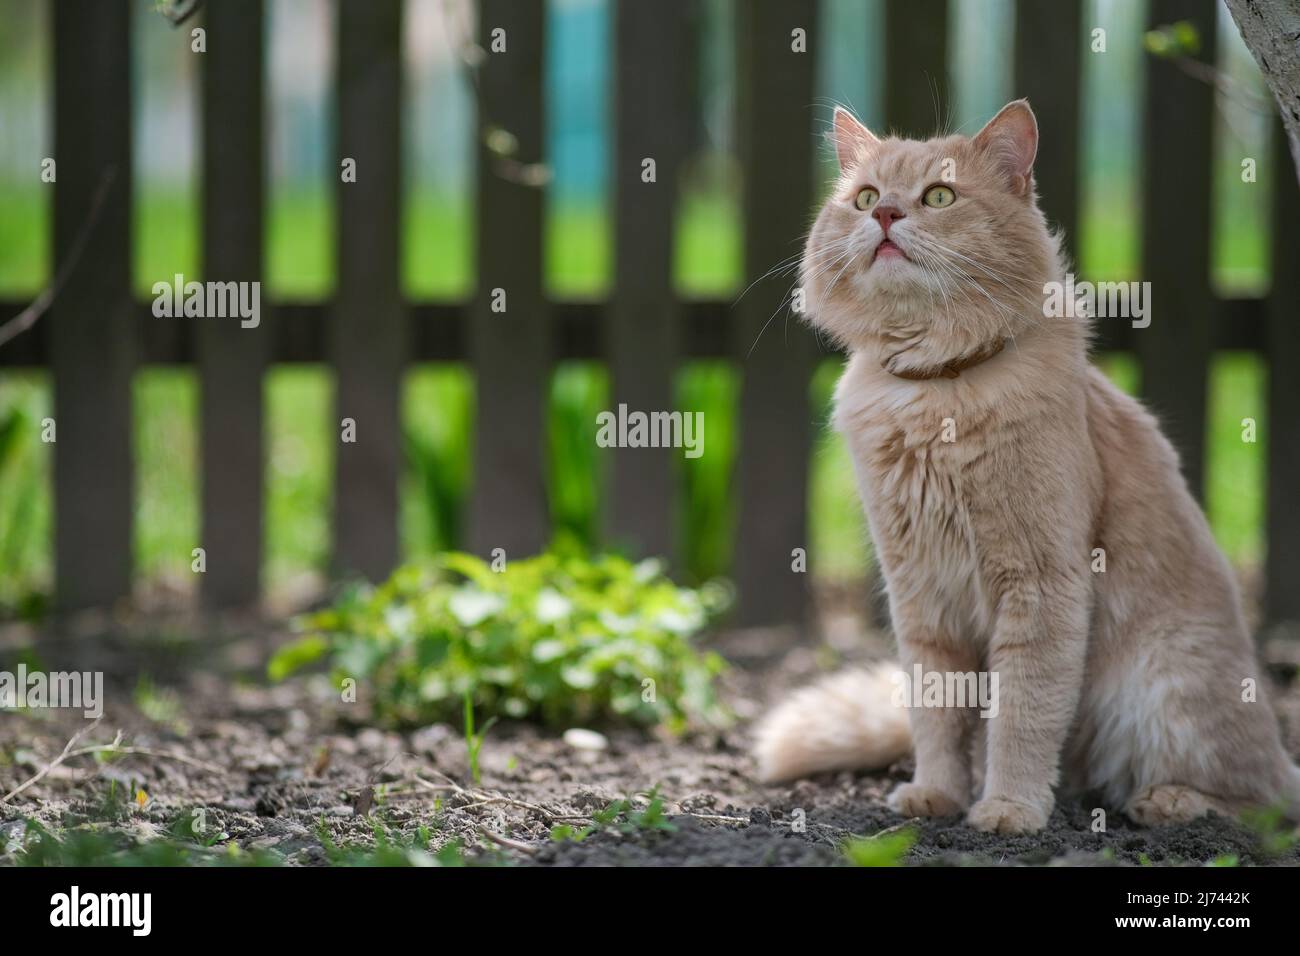 A light red cat sits near a stovbur and looks at the birds. Stock Photo